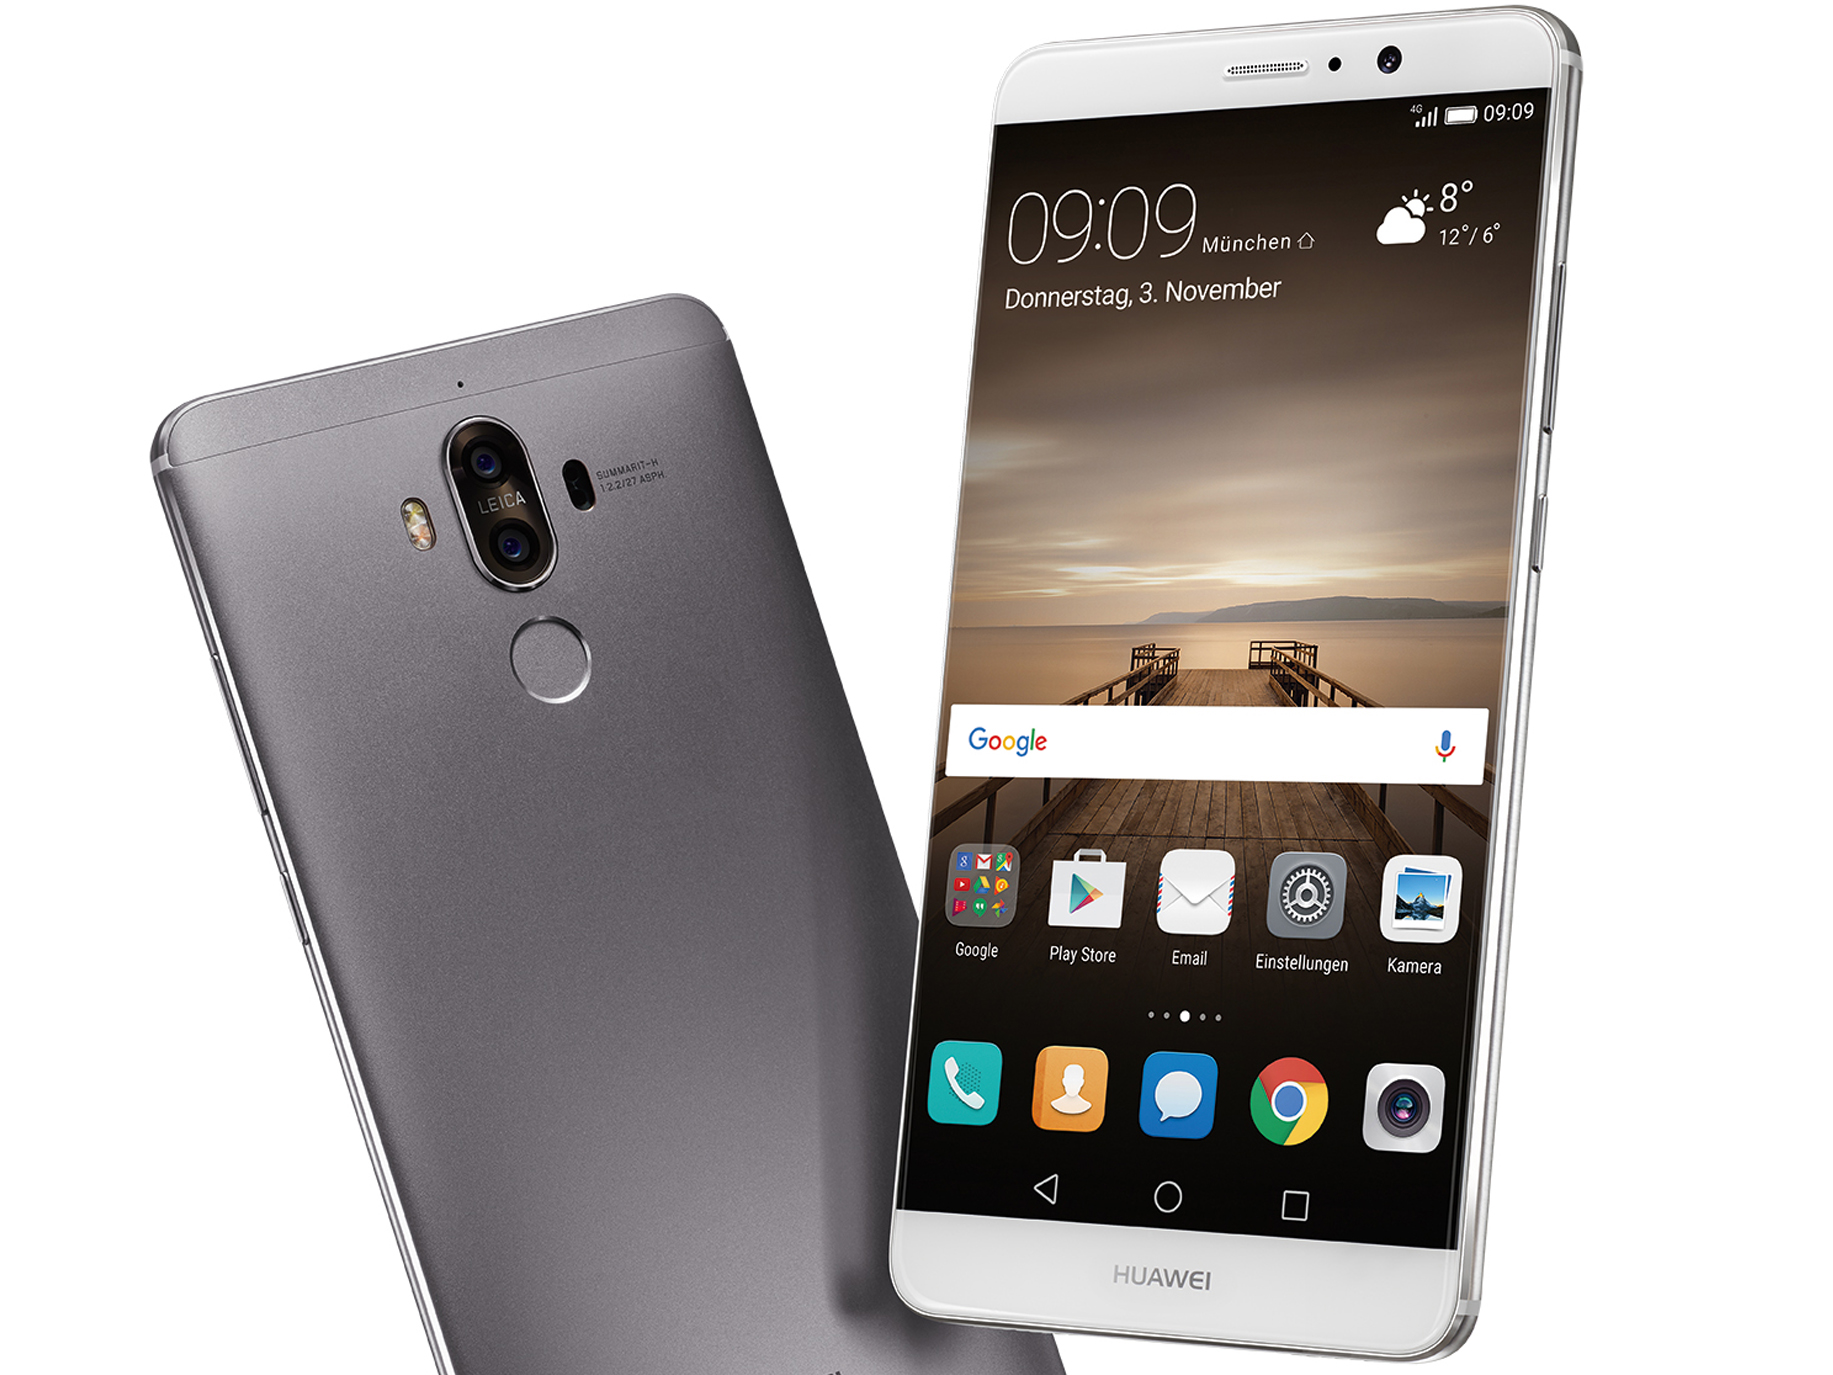 Huawei Mate Phablet Review NotebookCheck.net Reviews